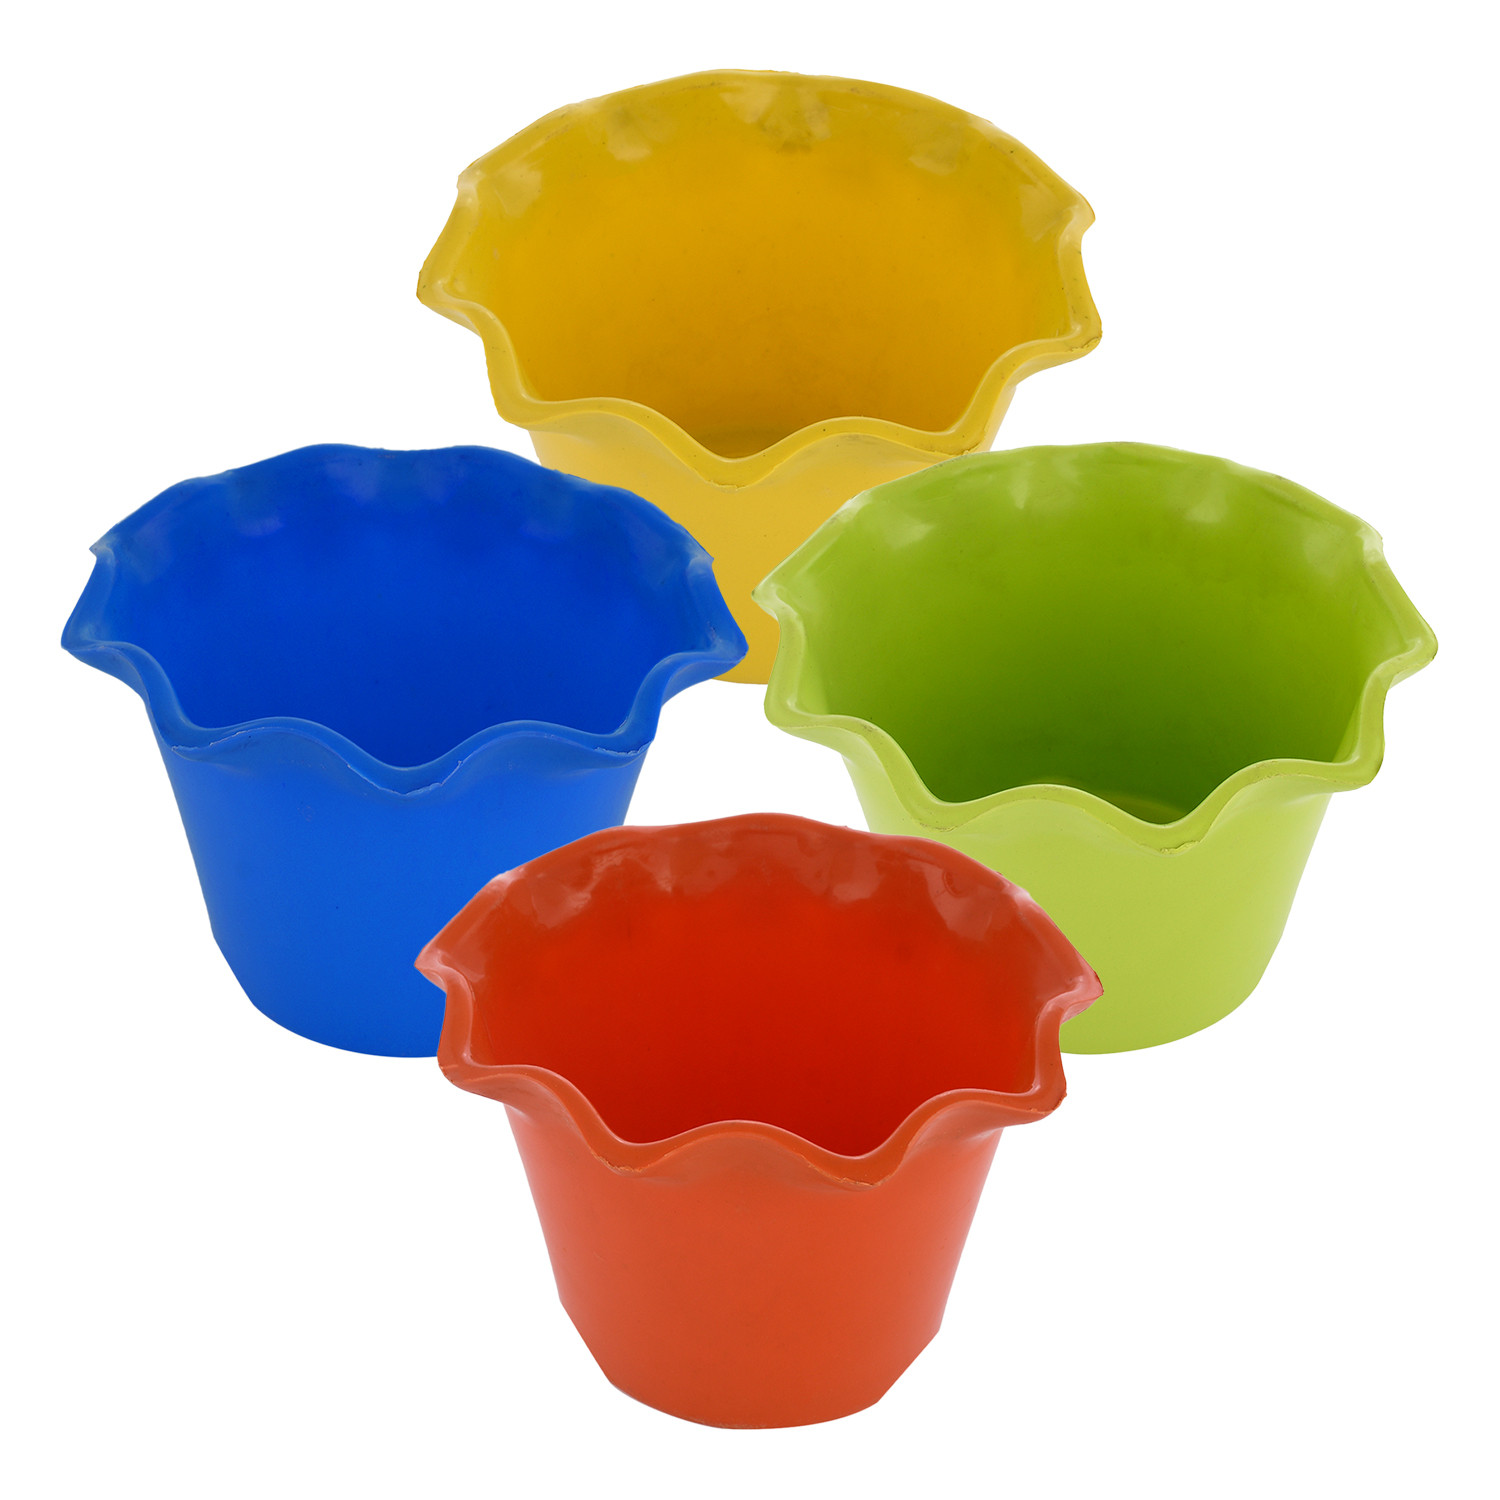 Kuber Industries Blossom Flower Pot|Durable Plastic Flower Pot|Gamla With Drain Holes for Home Décor|Balcony|Garden|8 Inch|Pack of 4 (Multicolor)